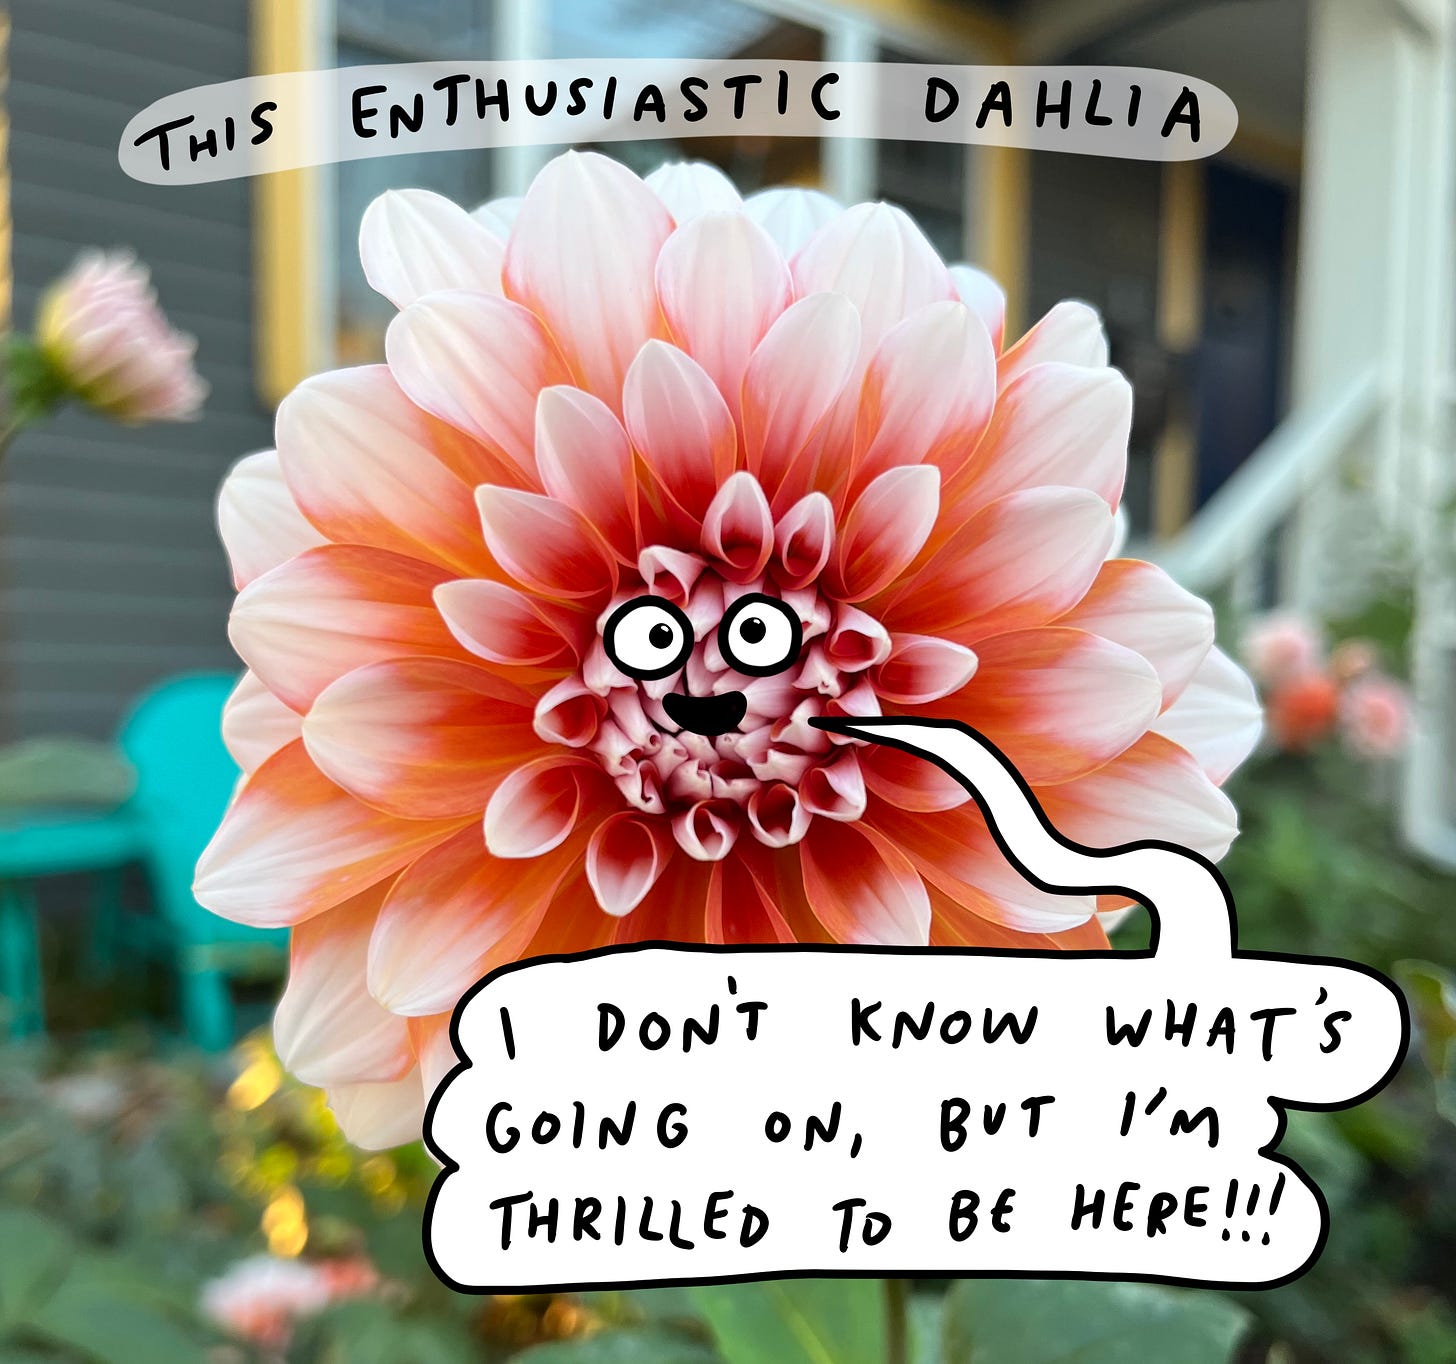 a salmon pink dahlia with an excited cartoon expression